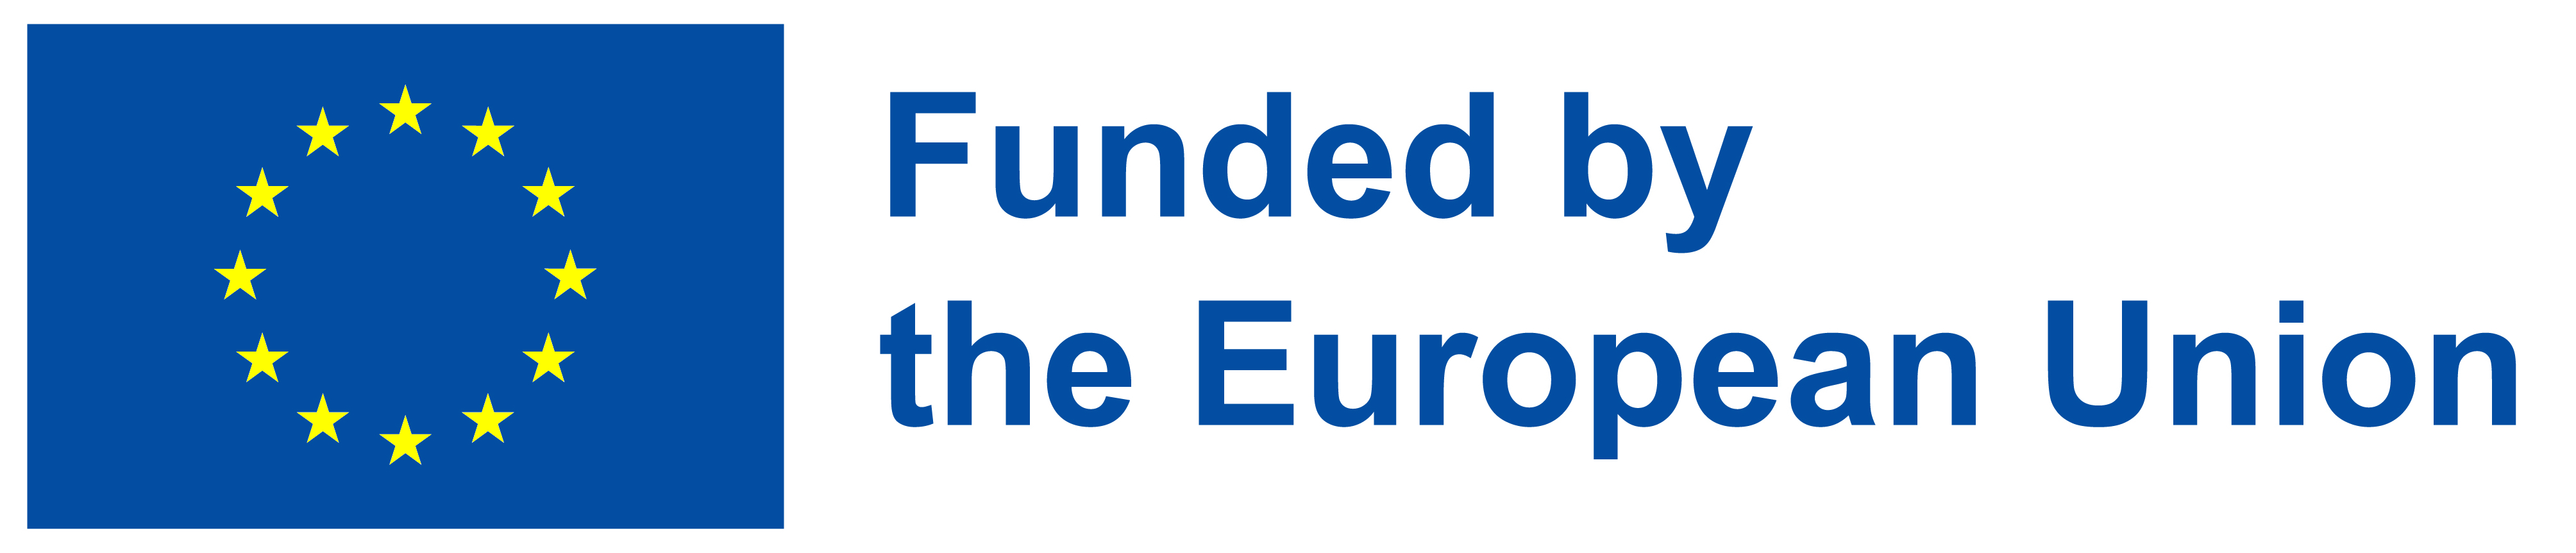 FUNDED BY THE EU logo